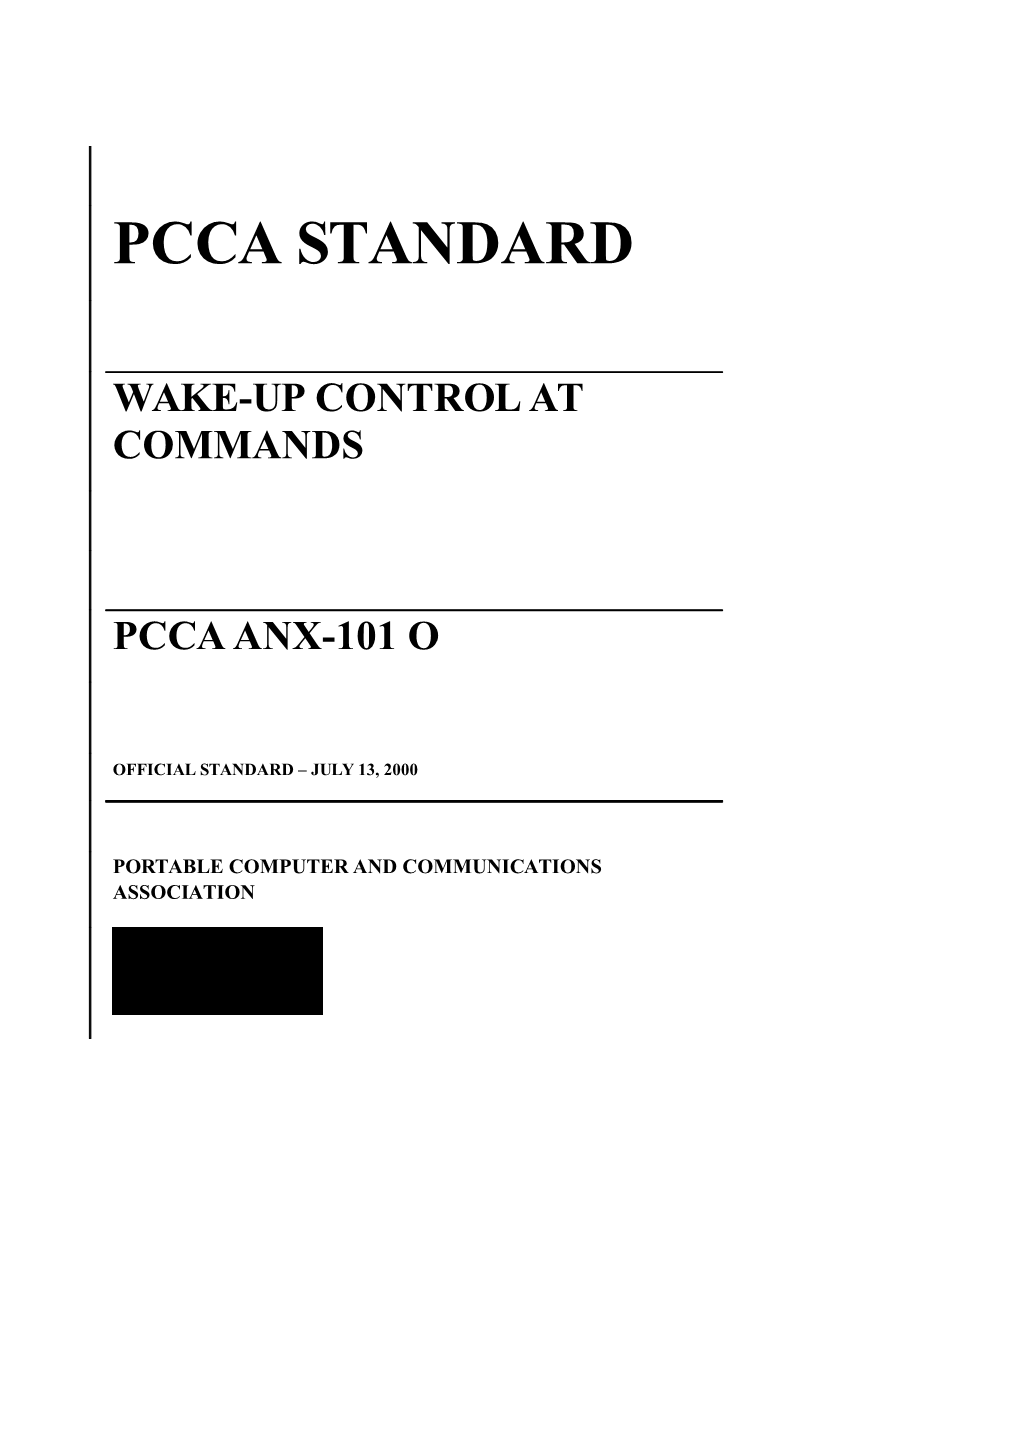 Wake-Up Command Proposal from MCPC